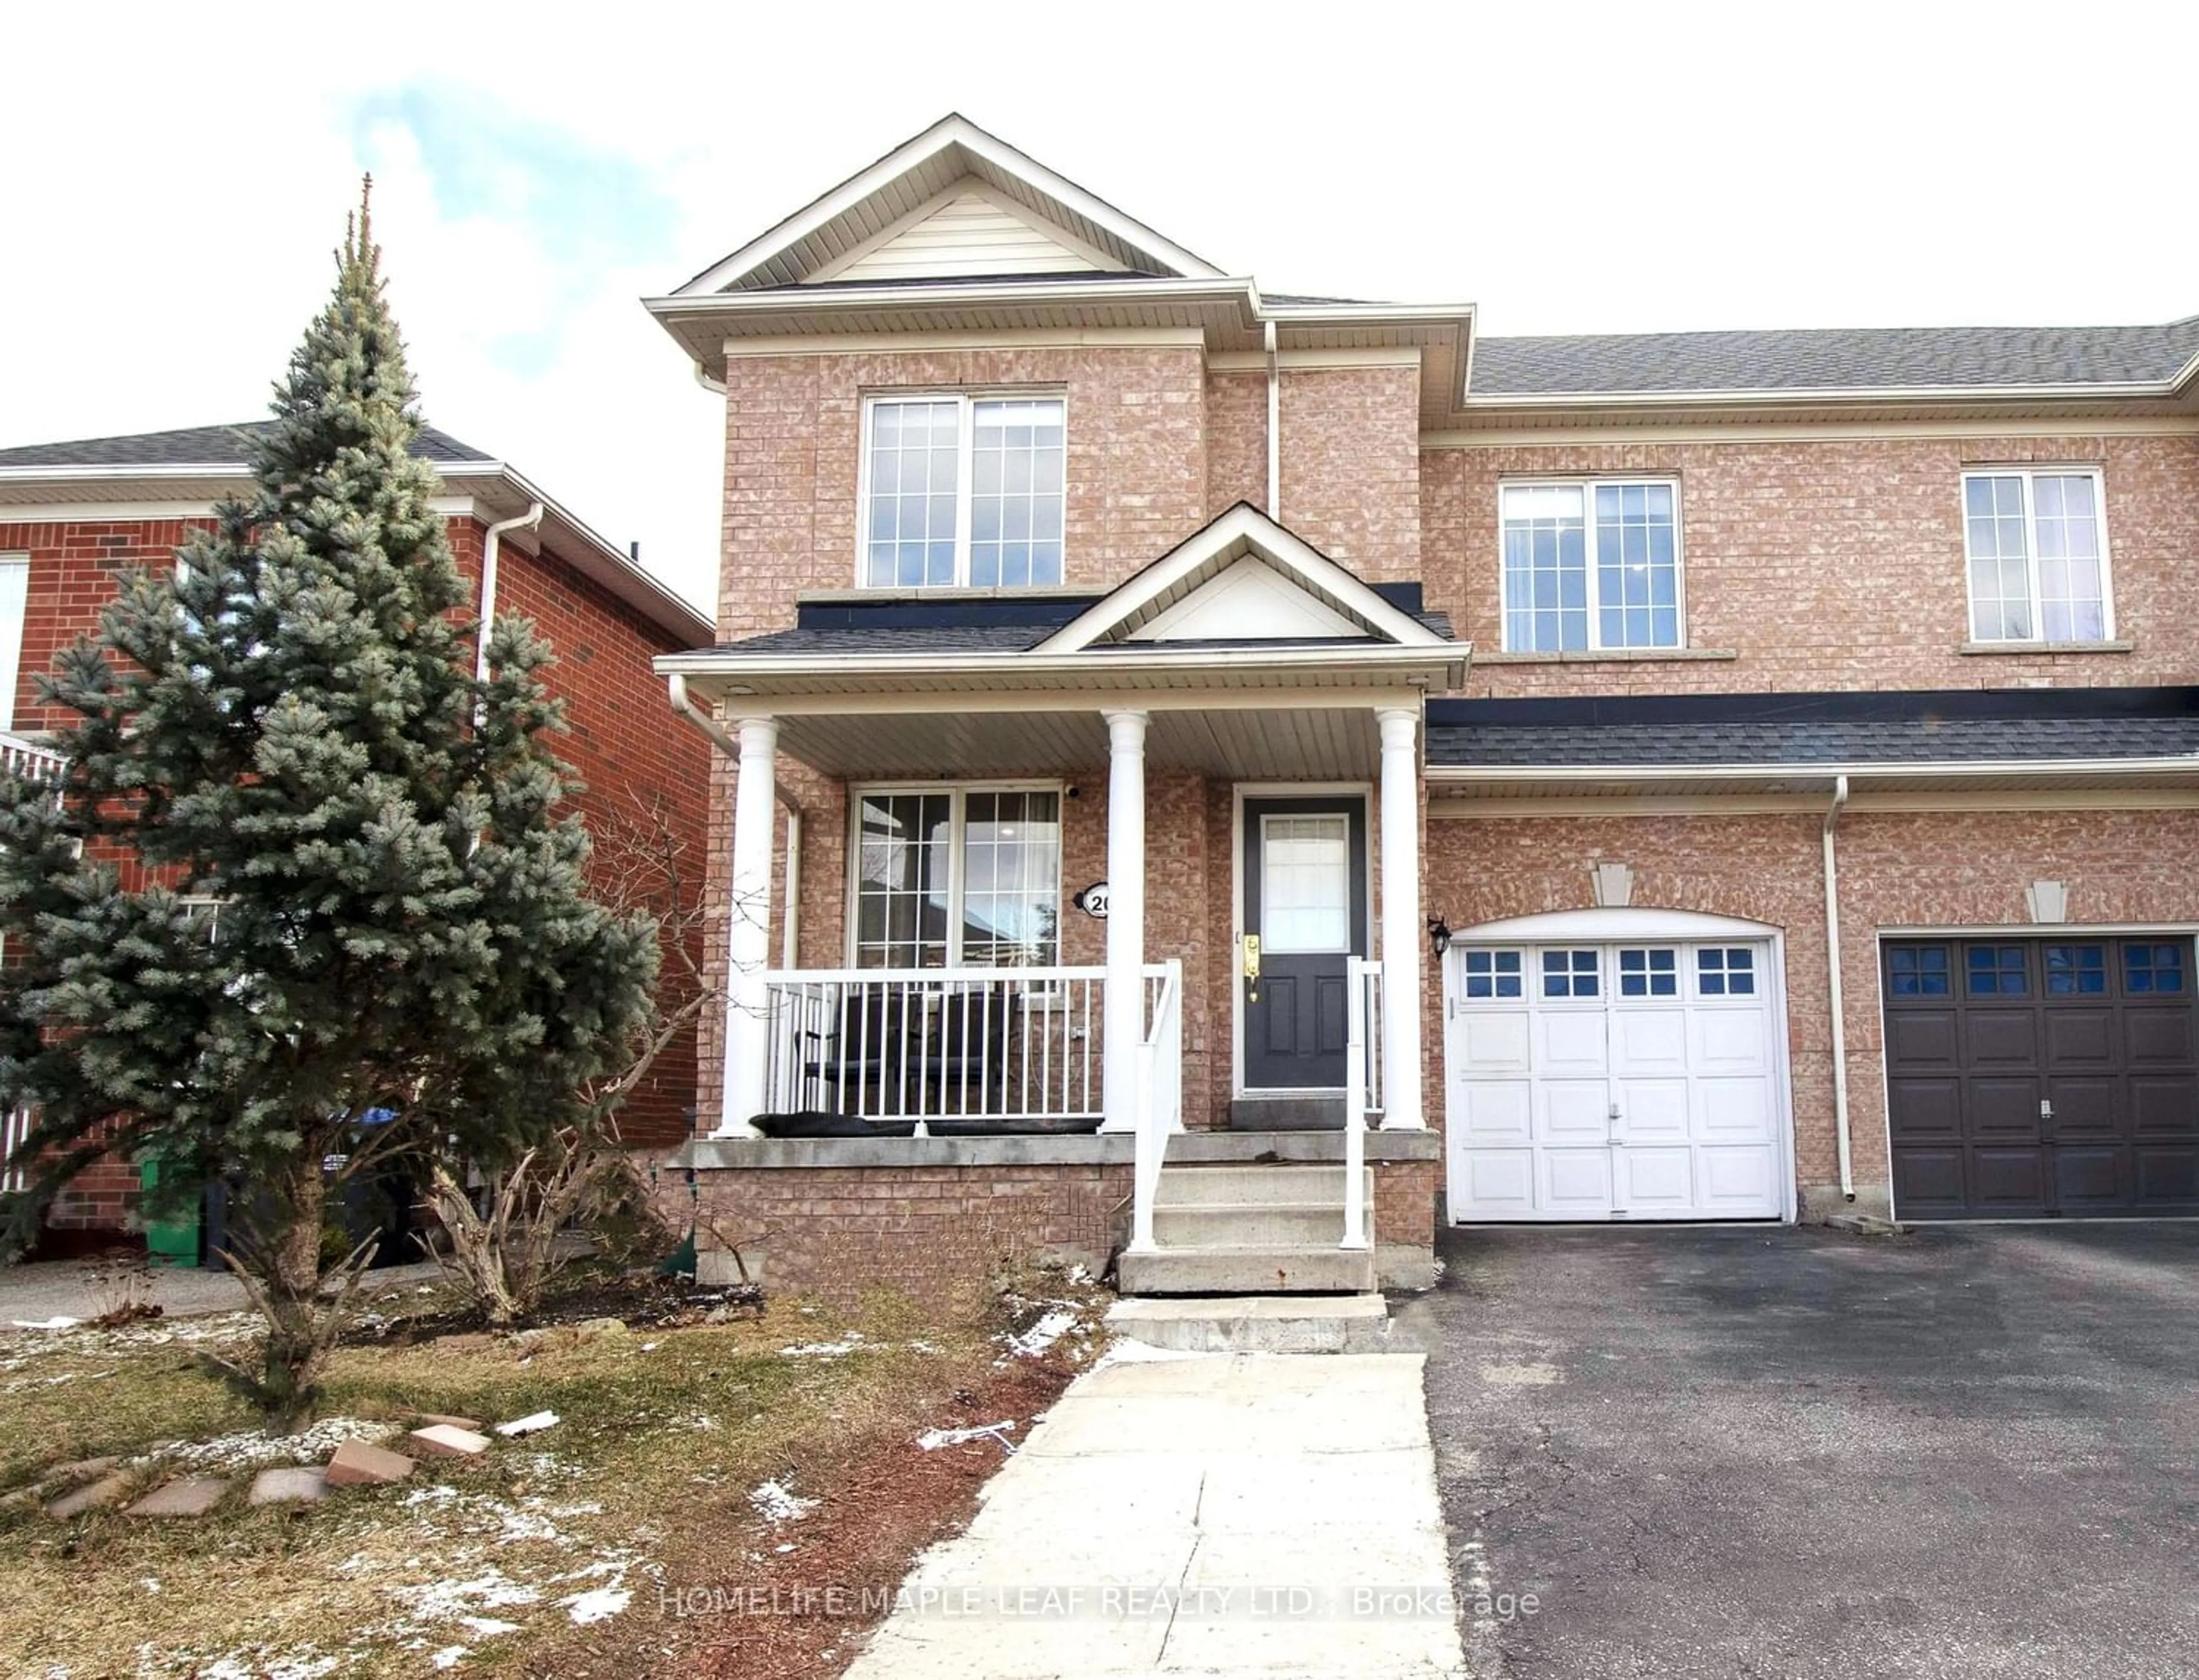 Home with brick exterior material for 20 Olivett Lane, Brampton Ontario L7A 2X3